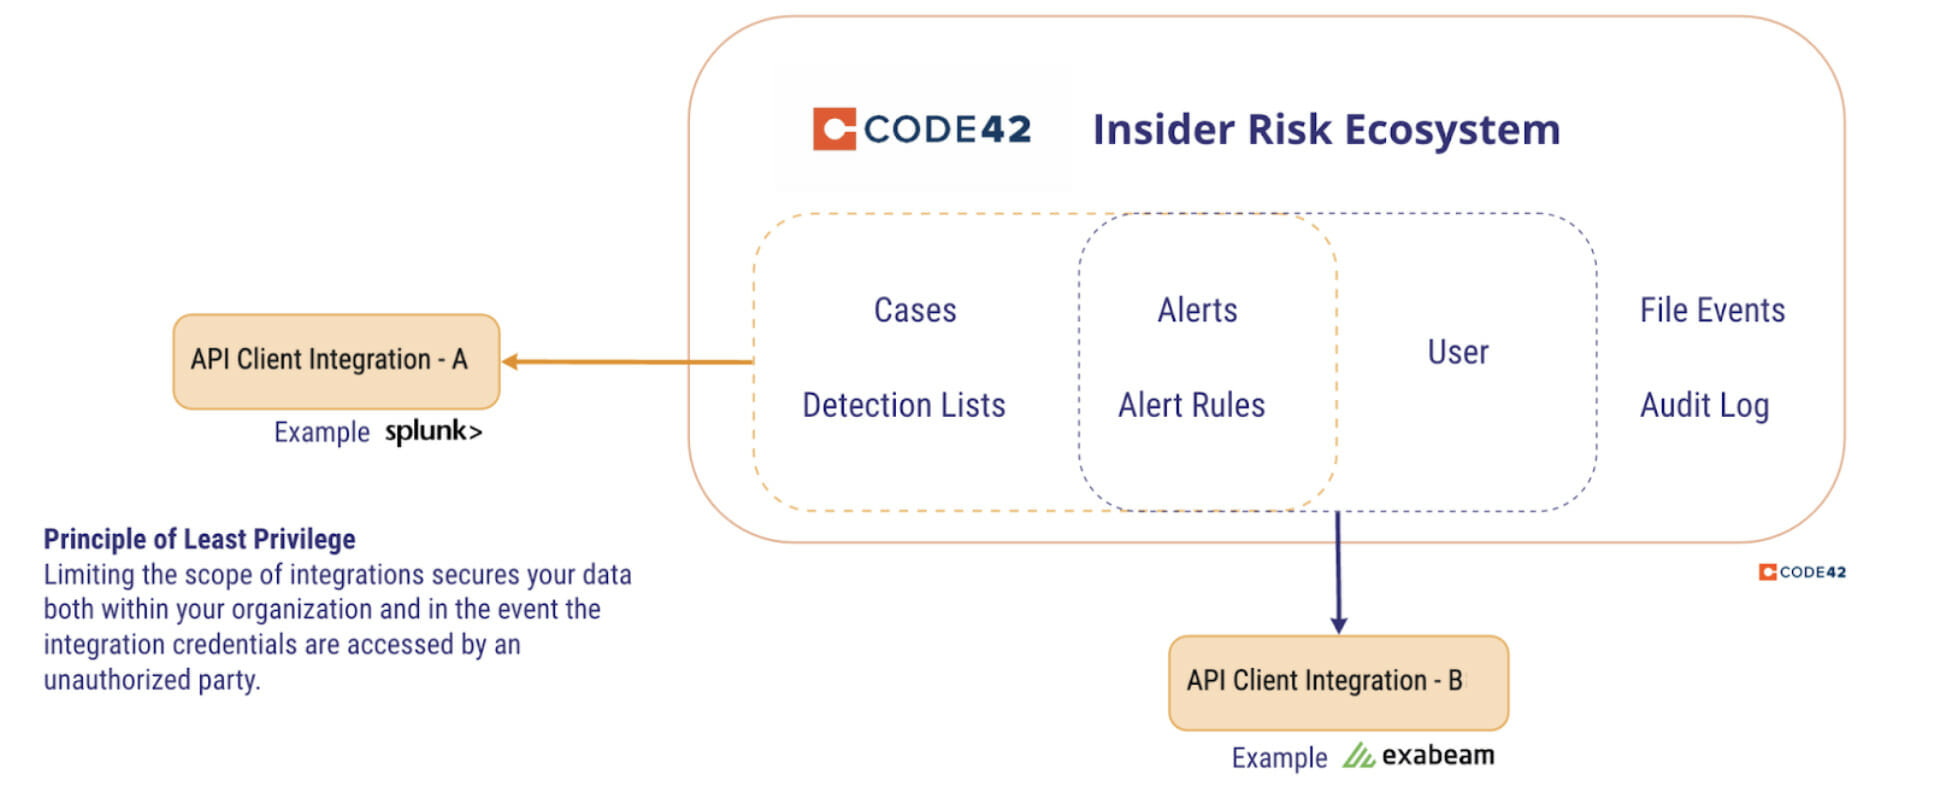 API client integrations to the Code42 Insider Risk Ecosystem.